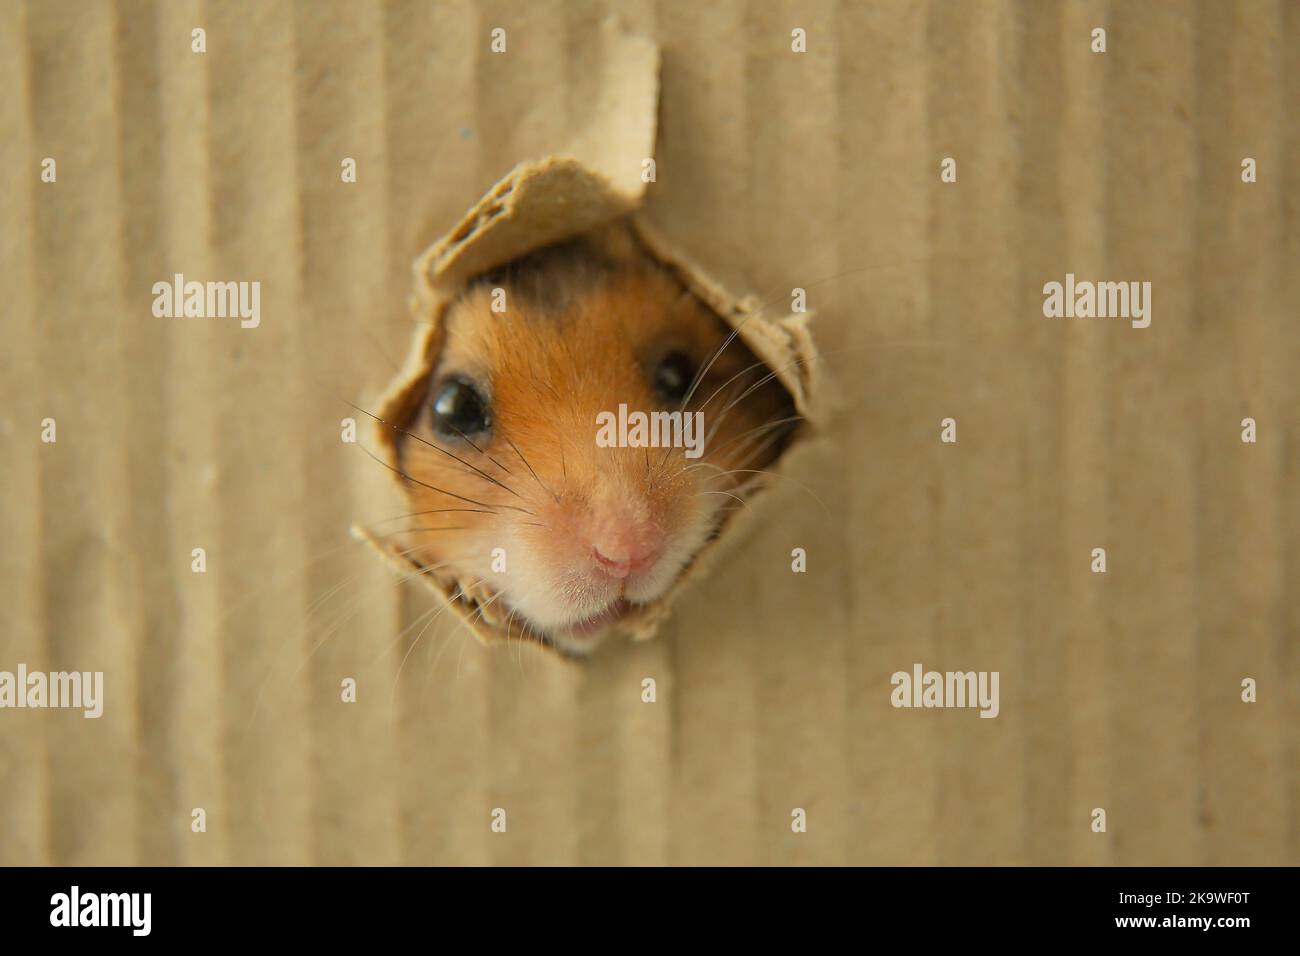 The muzzle of a red hamster in a hole. A Syrian hamster looks out of a dirvka . Eyes, nose, ears of a rodent. A curious animal. Copy space. Stock Photo